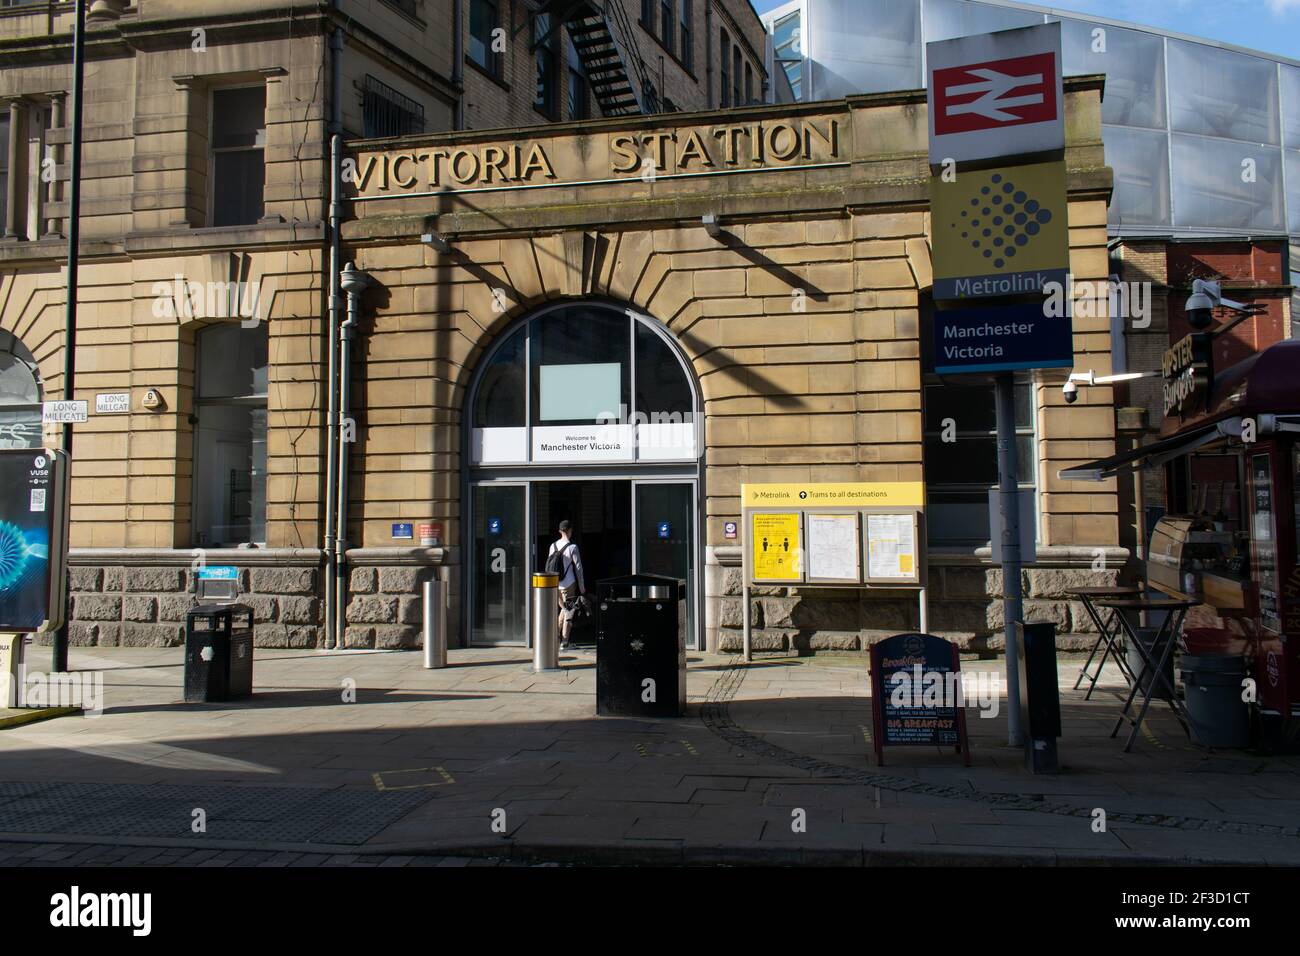 Manchester Victoria Railway Station entrance with passenger entering door and sign for Intercity and Metrolink, Greater Manchester,UK Stock Photo